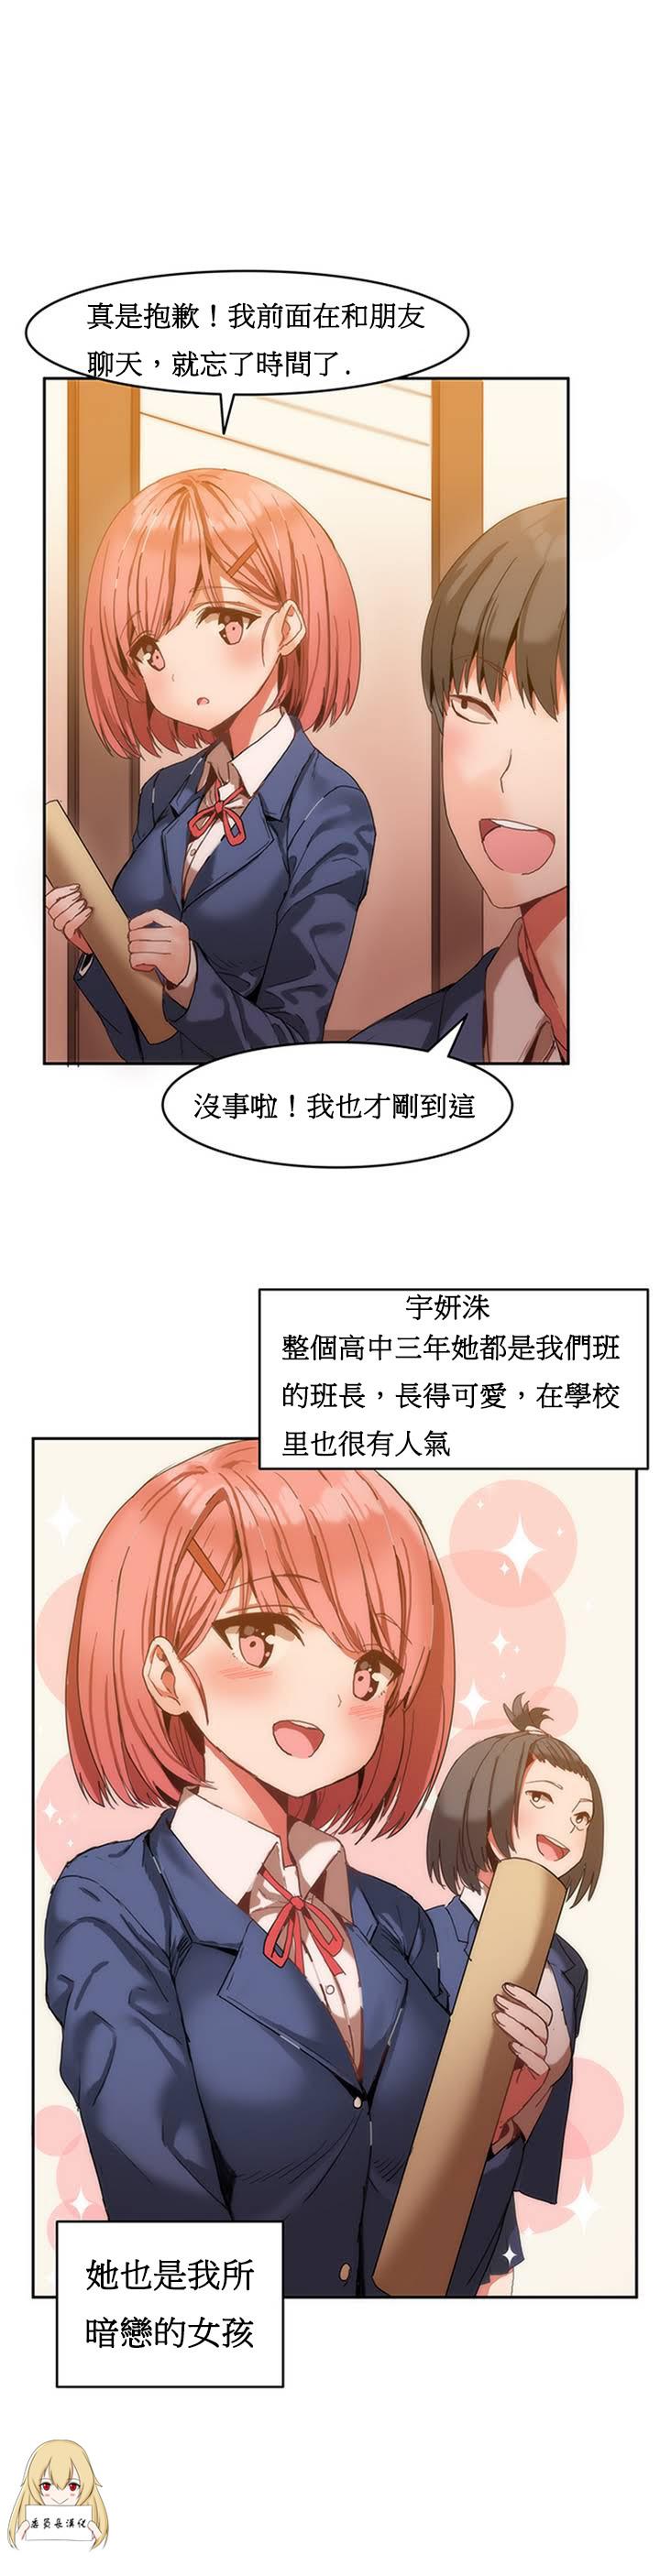 Hd Porn Hahri's Lumpy Boardhouse Ch. 1~18【委員長個人漢化】（持續更新） Blackdick - Page 5